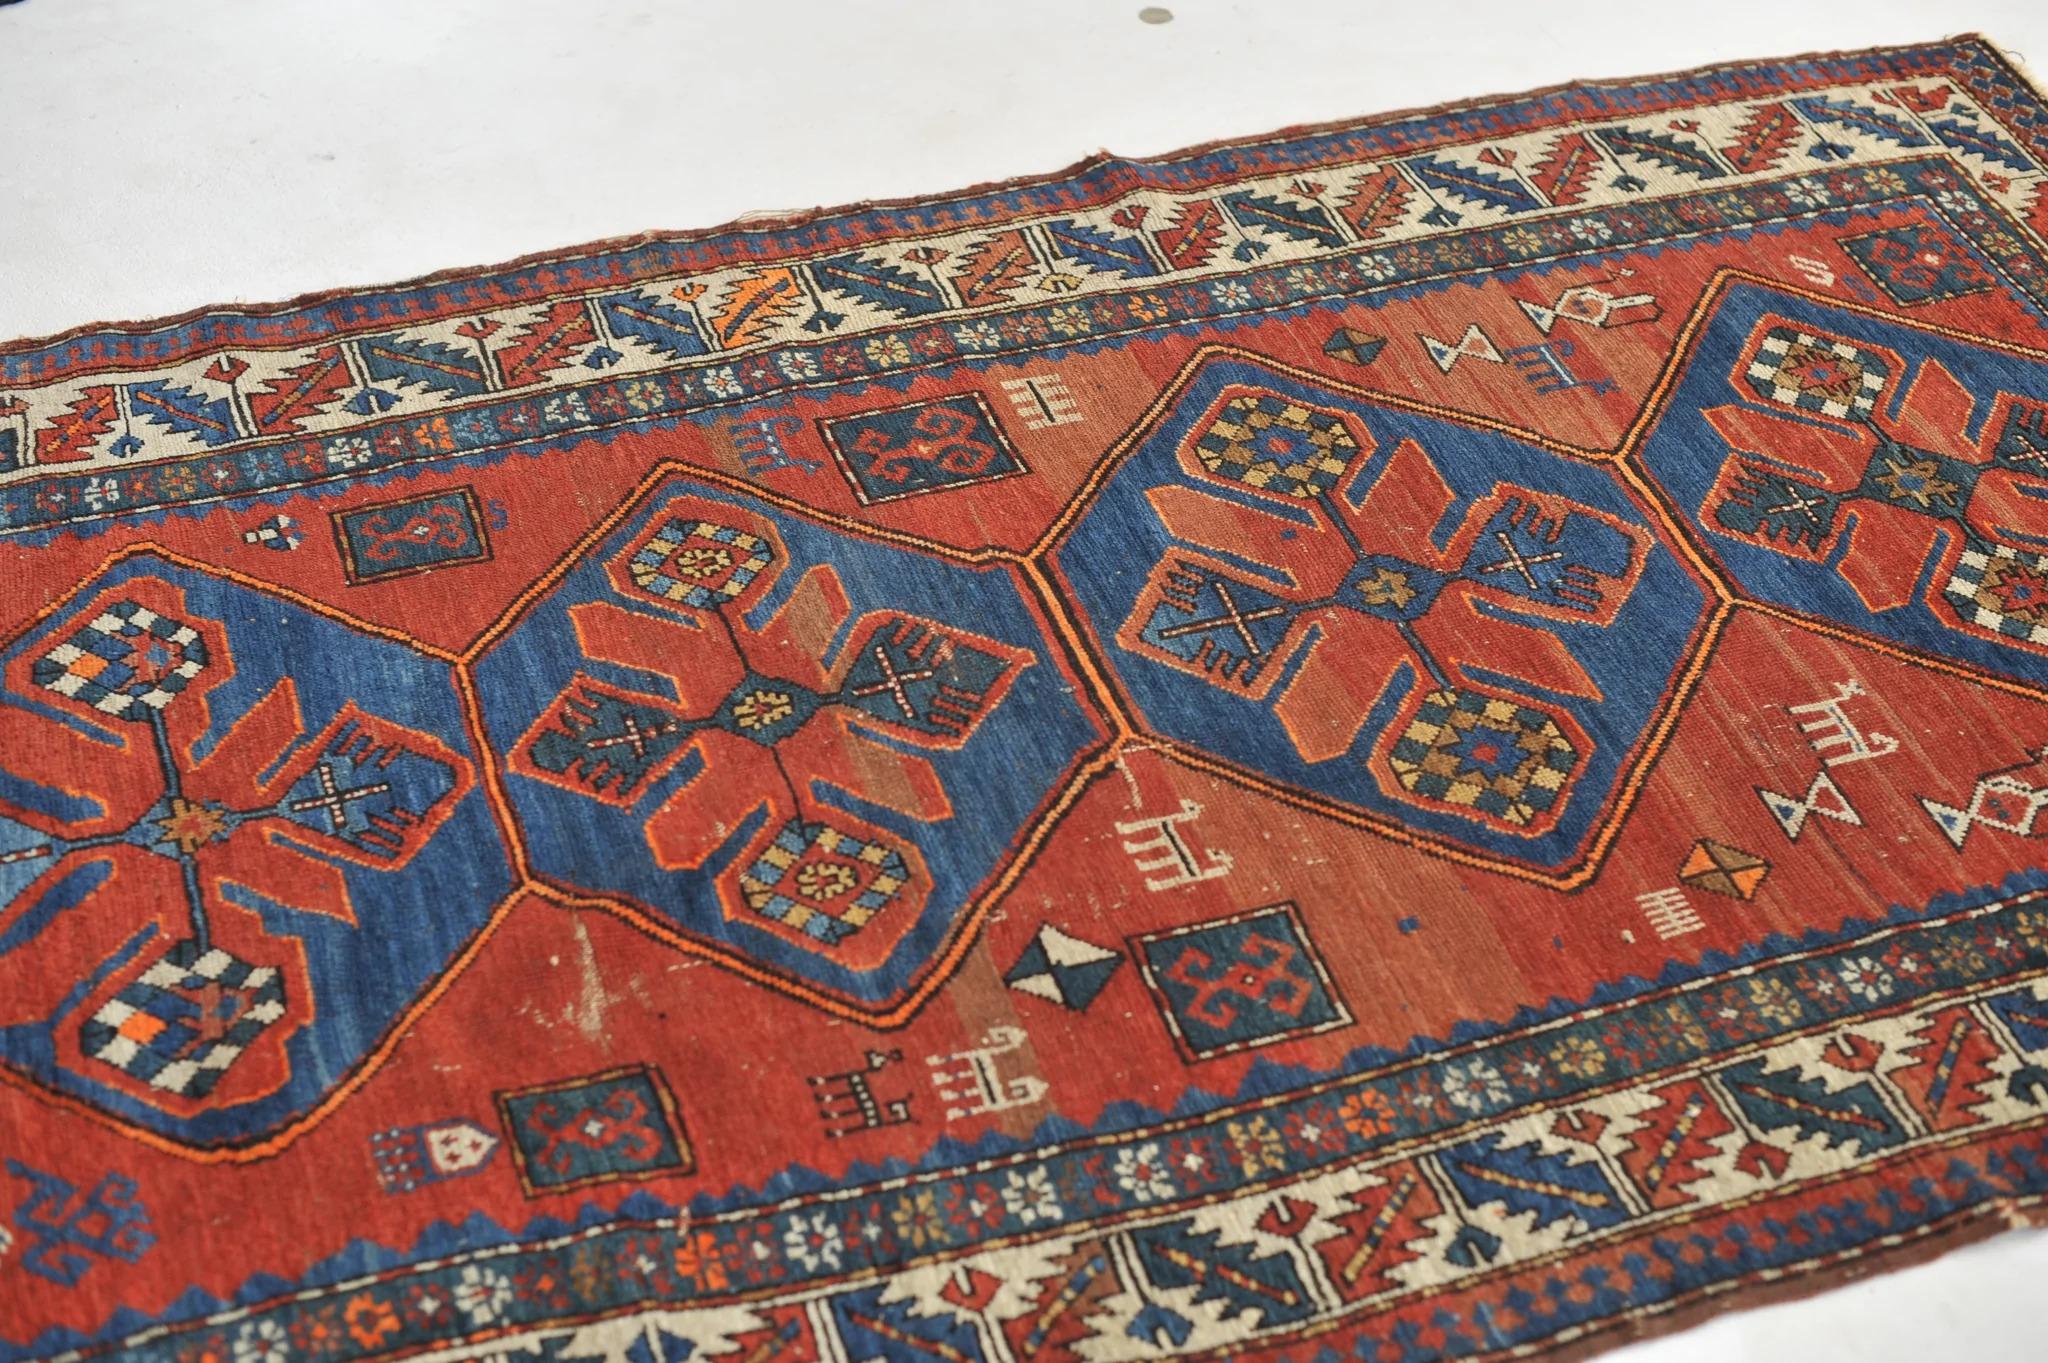 Antique Kazak Tribal Rug with Variations of Clay, Rust, Autumn For Sale 3